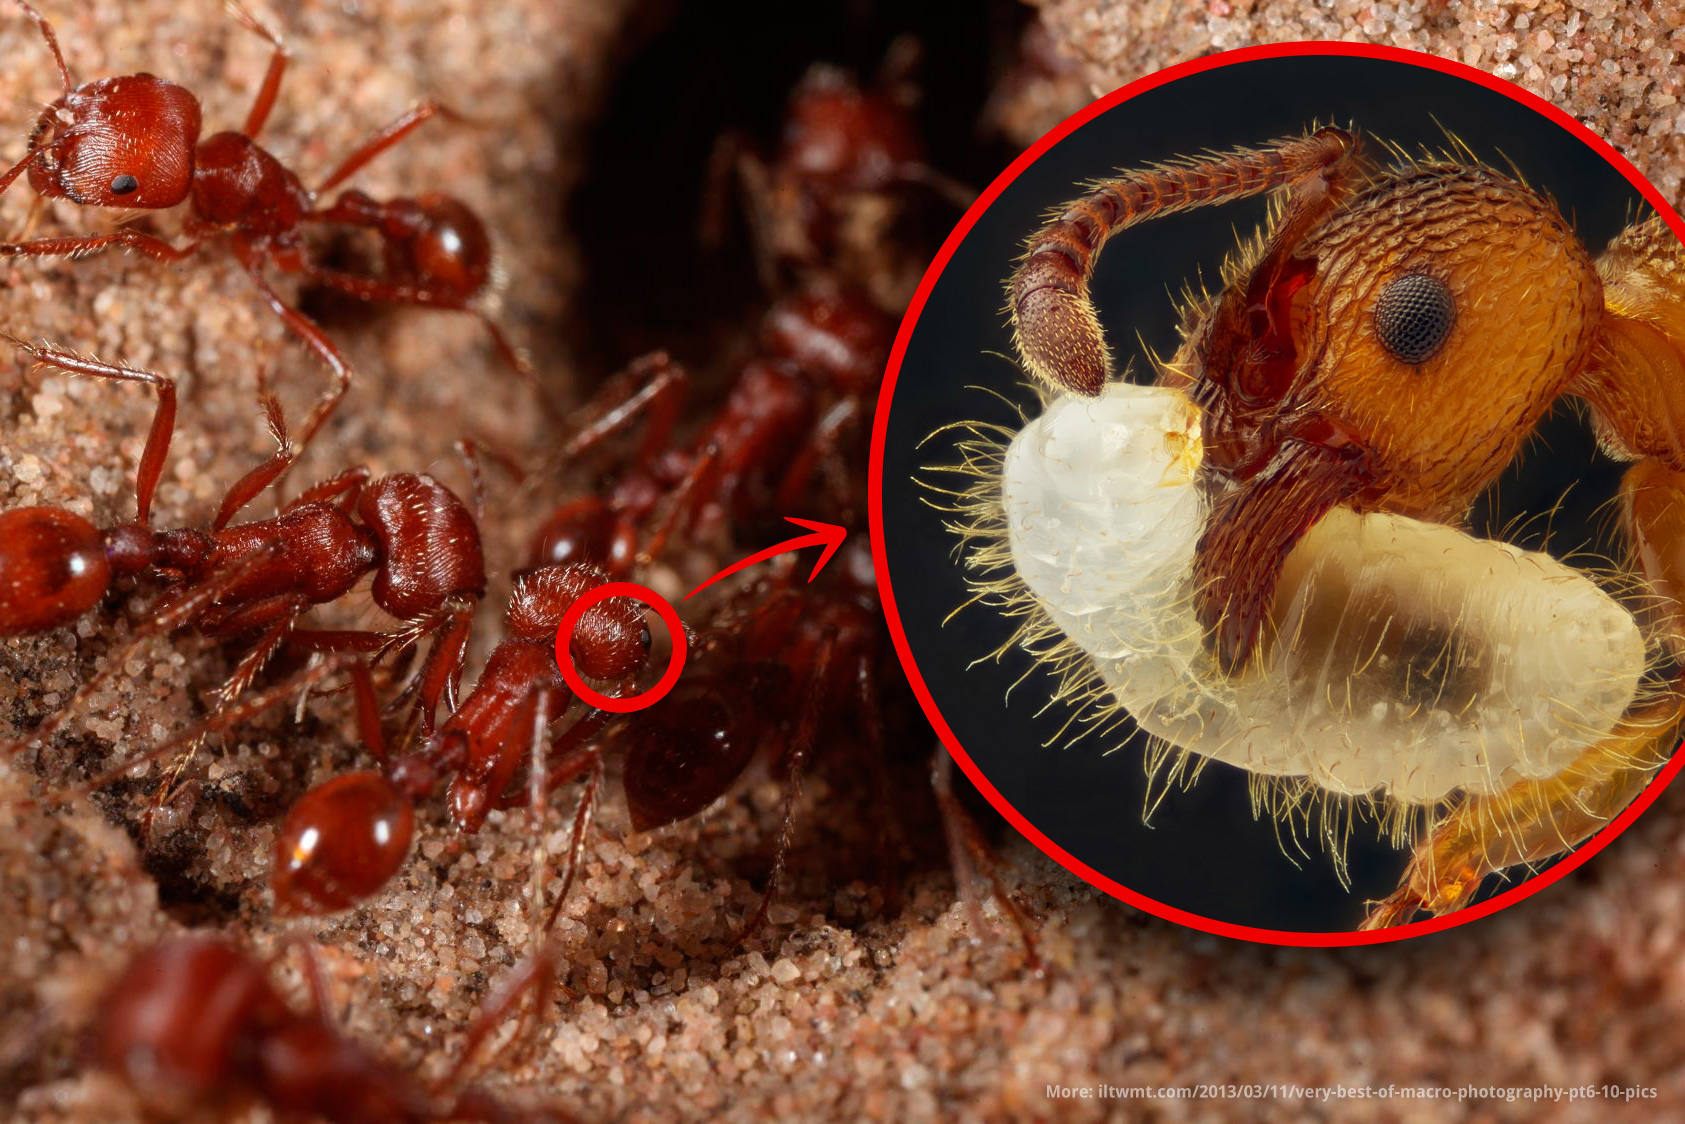 Red ant magnified ×5